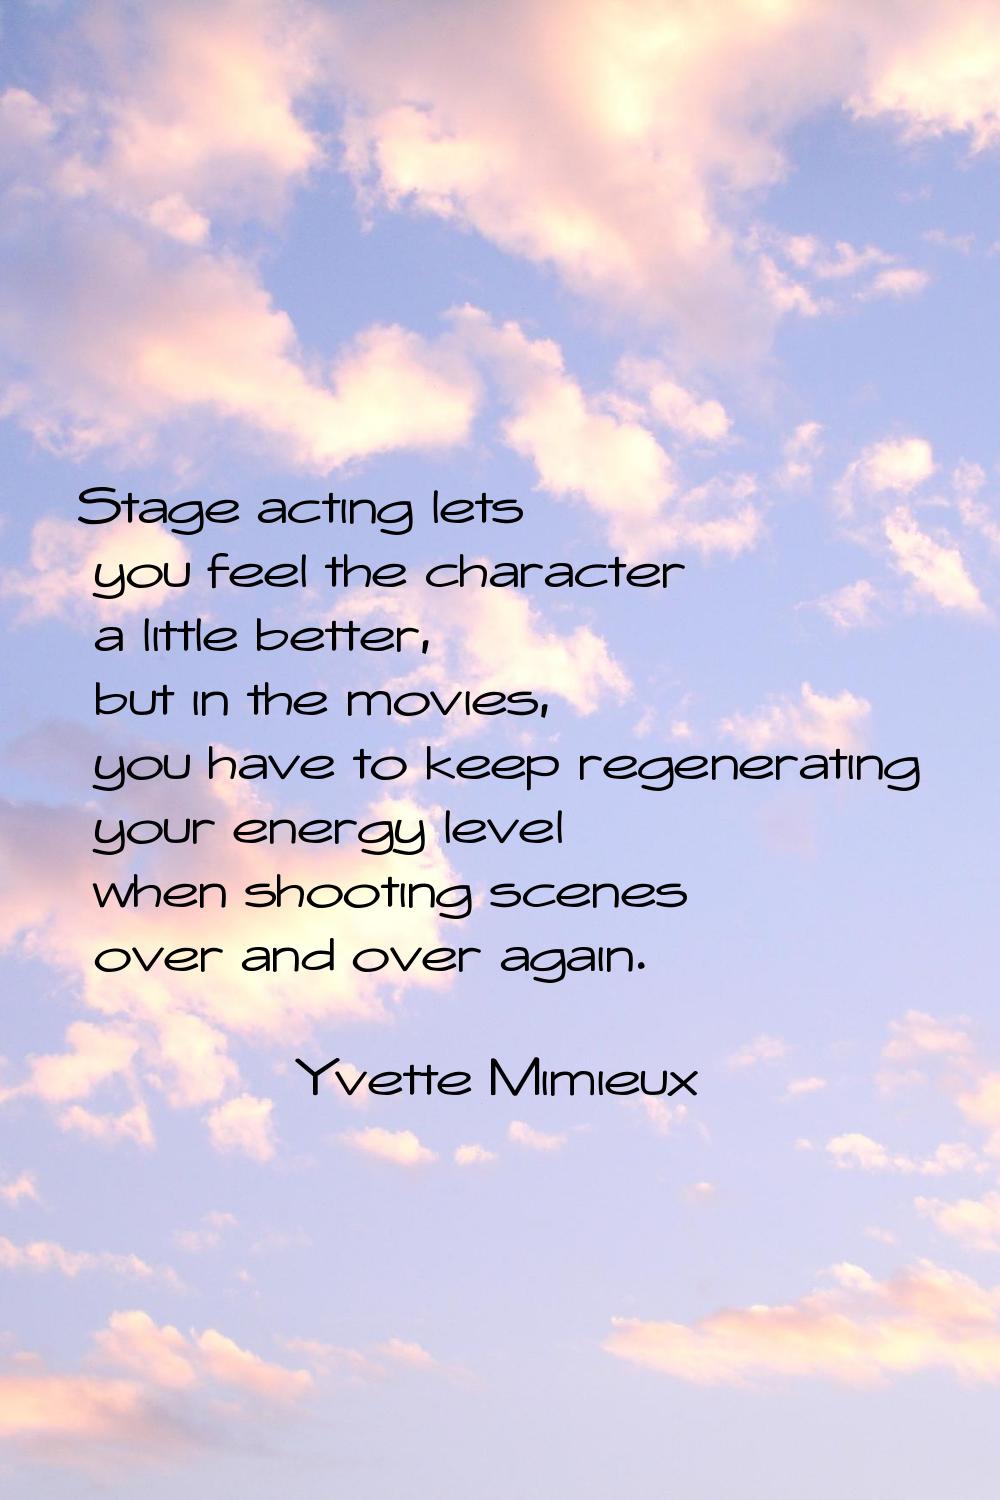 Stage acting lets you feel the character a little better, but in the movies, you have to keep regen